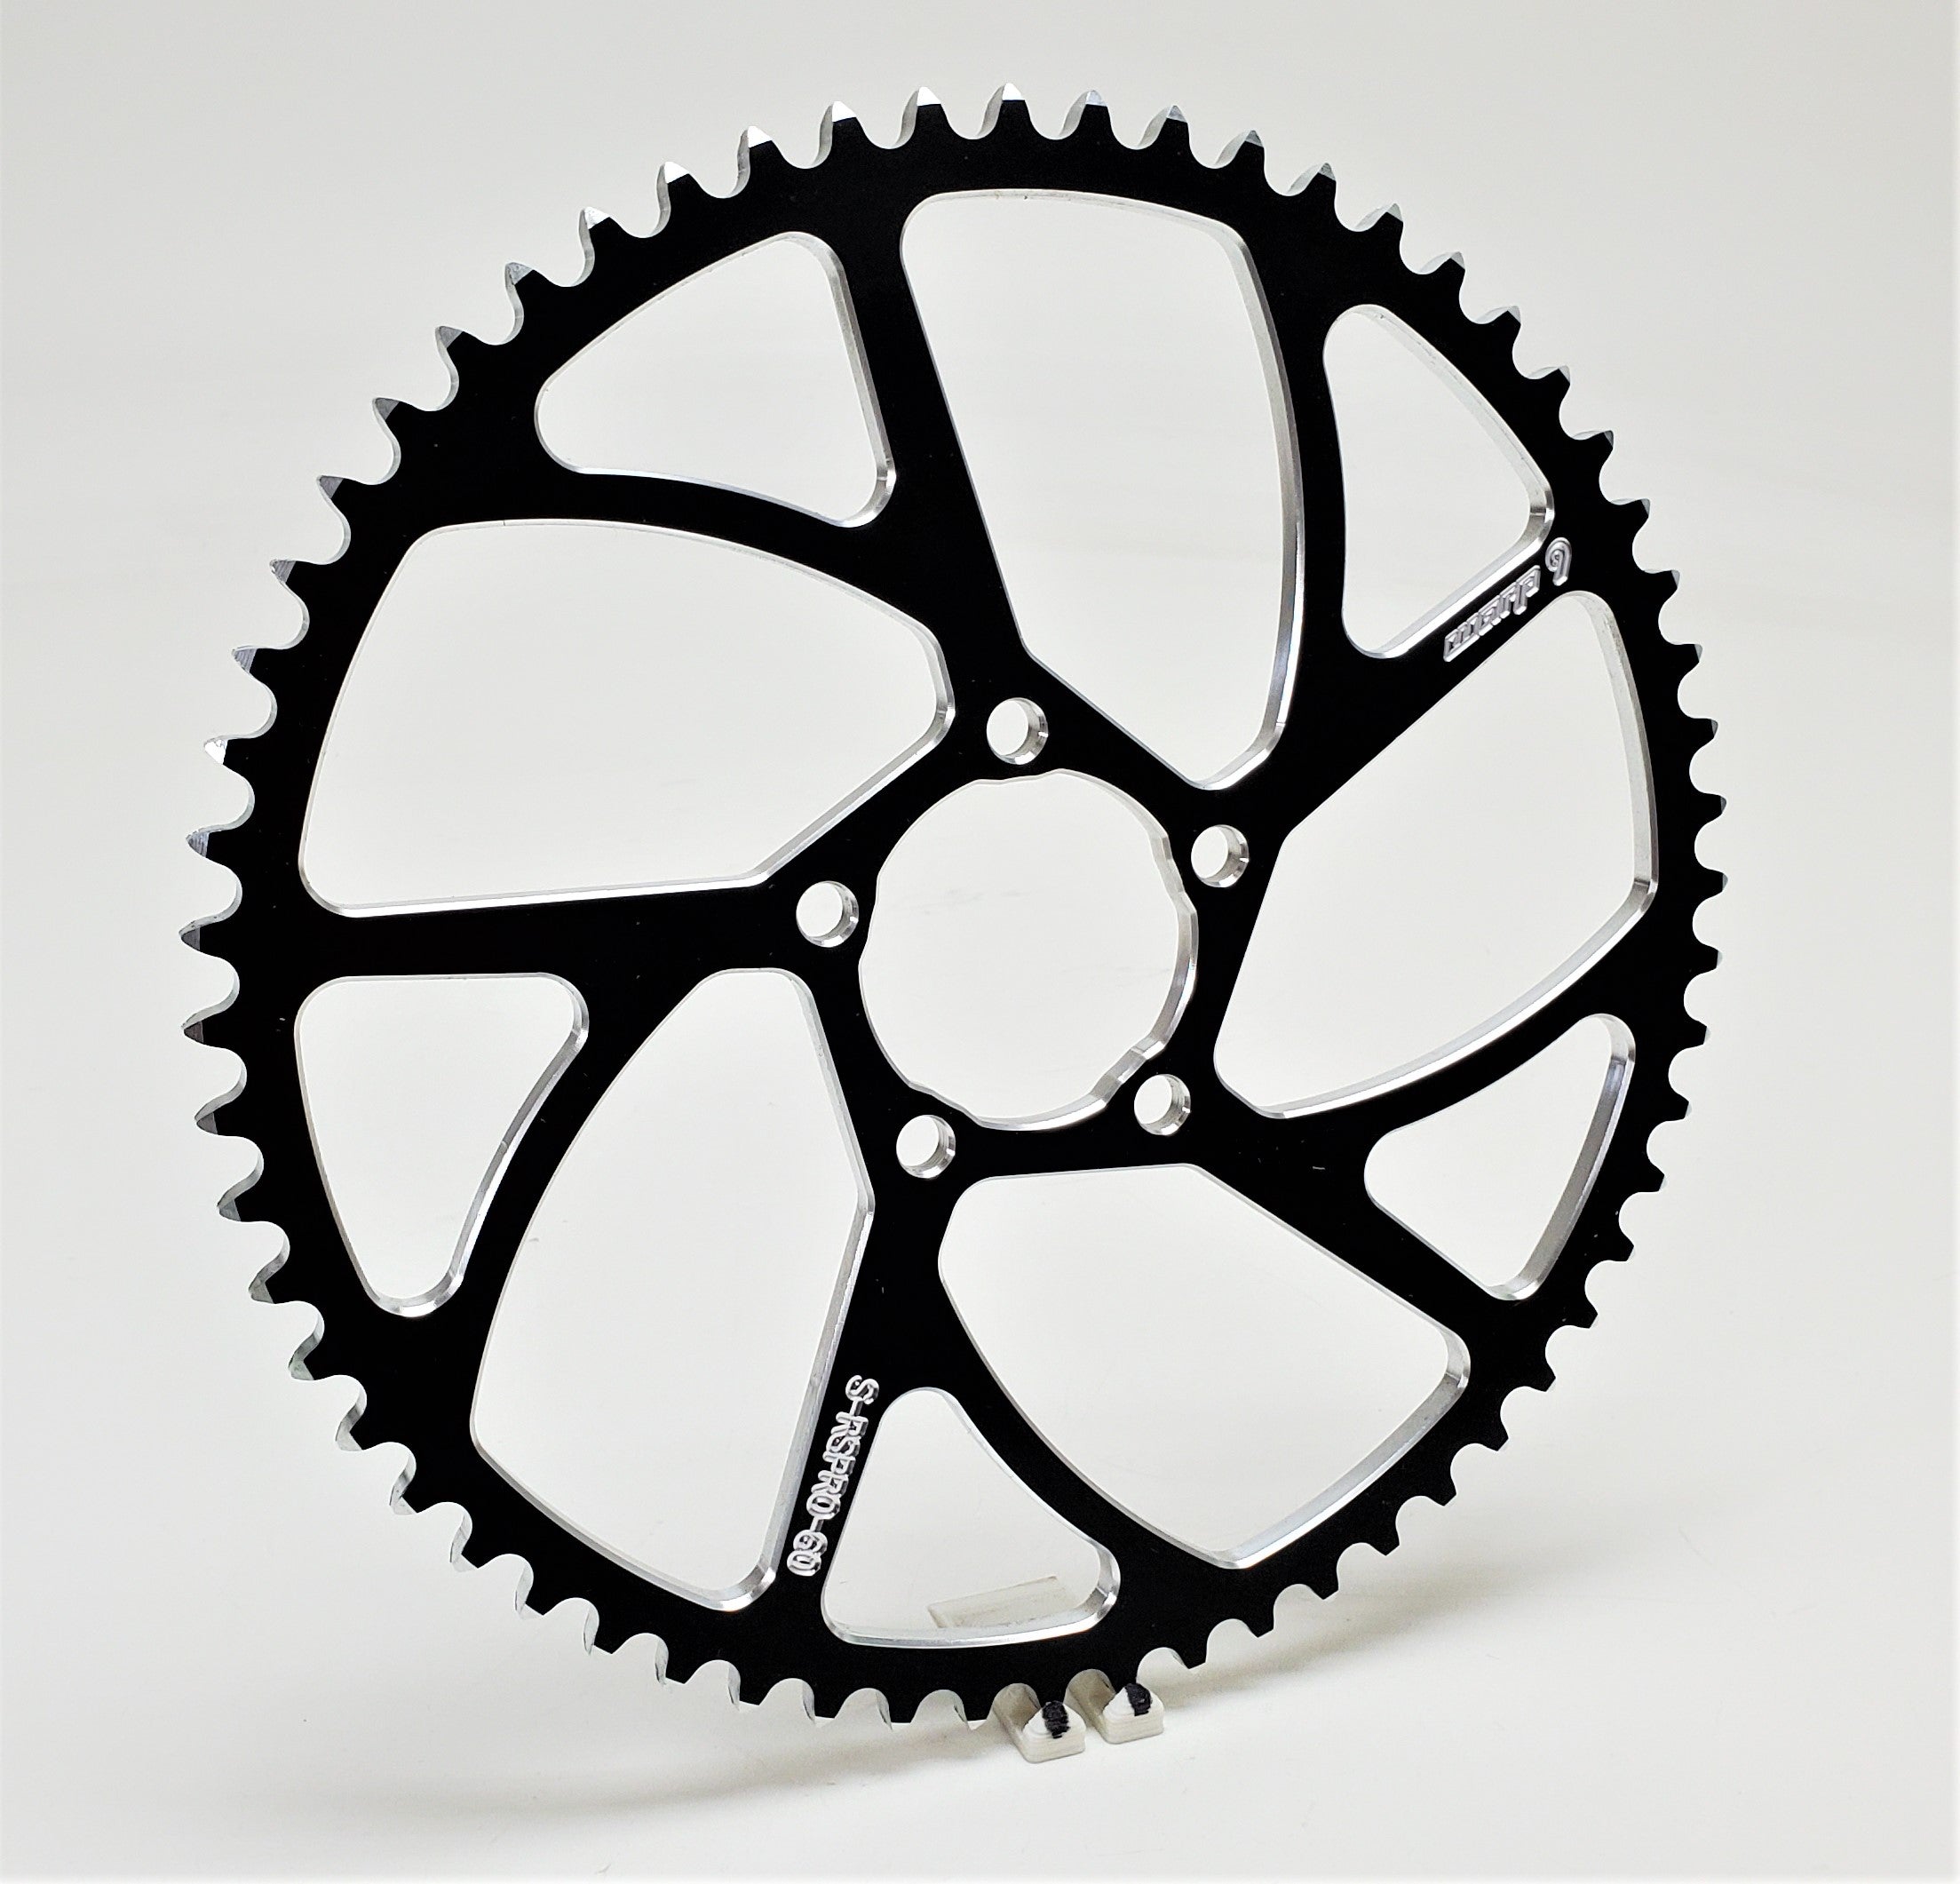 Warp 9 60 tooth sprocket for Surron Lightbee X and Talaria Sting